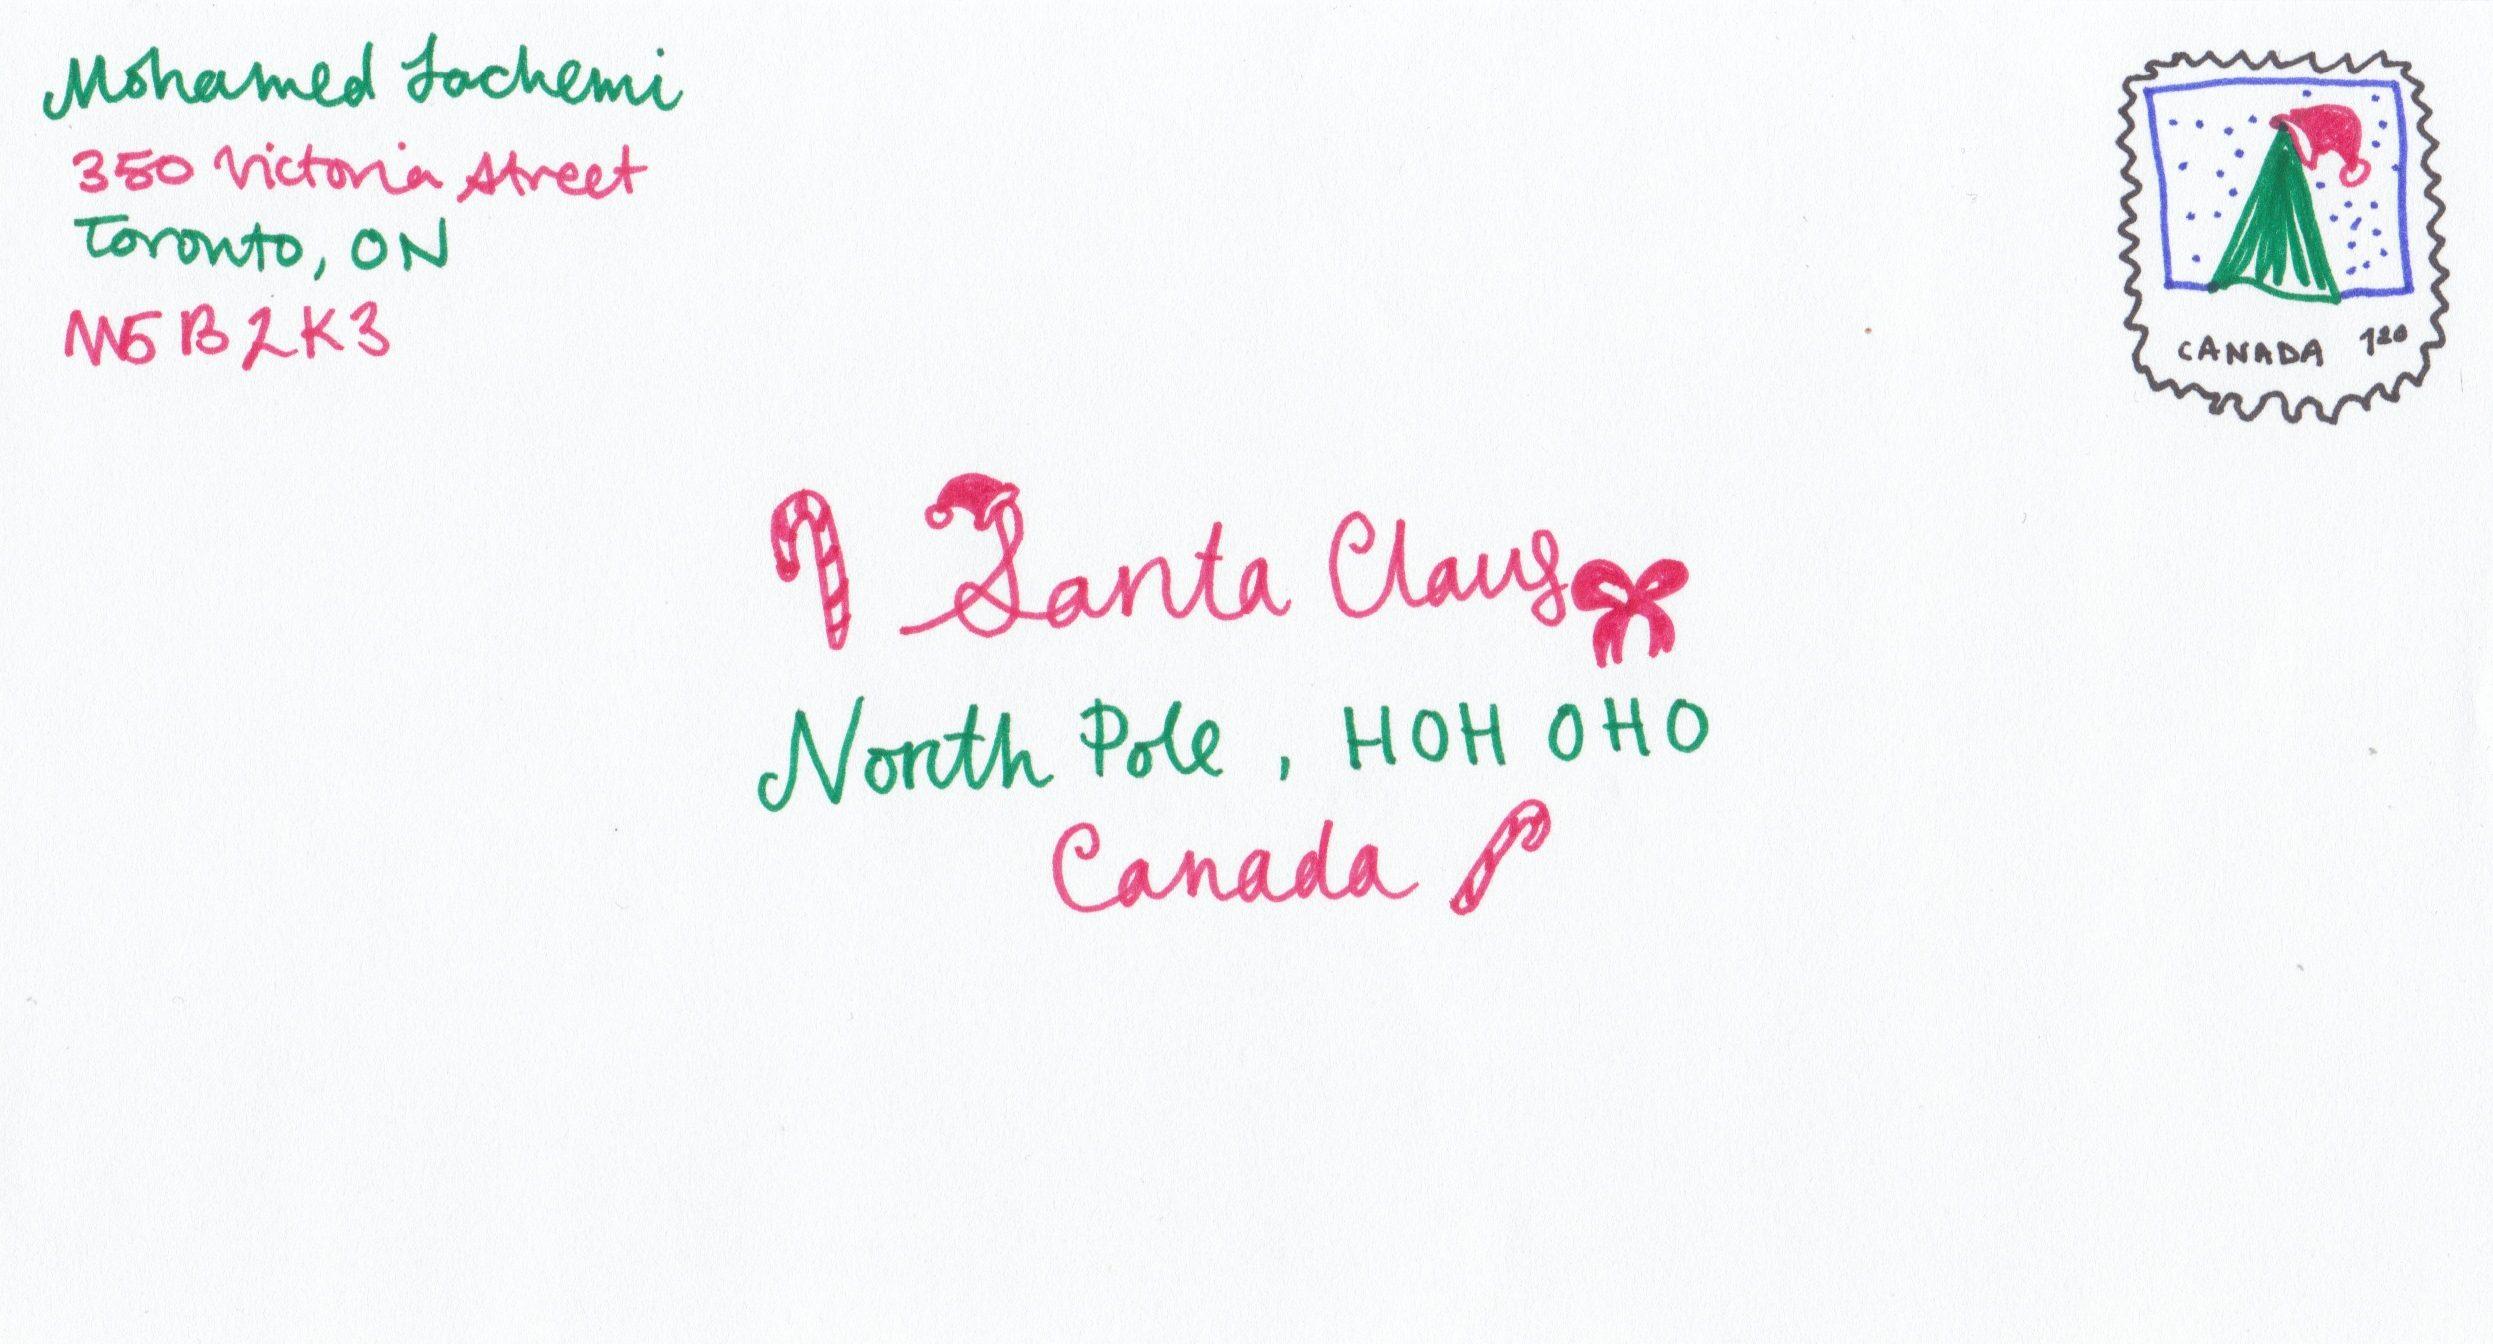 The cover of a letter with Santa's address on the cover